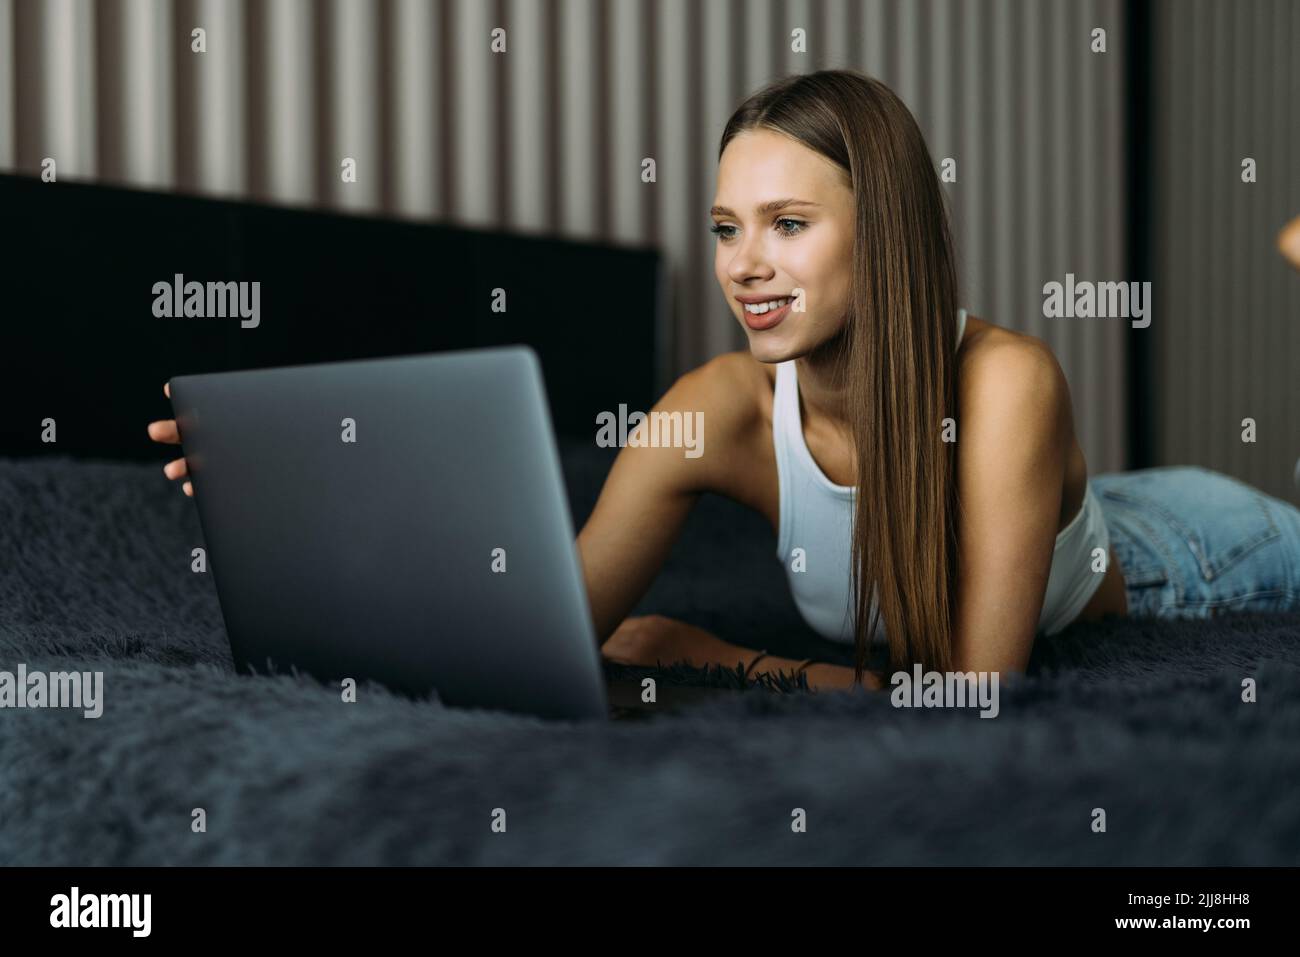 Smiling woman catching up on her social media as she relaxes in bed with a laptop computer on a lazy day Stock Photo